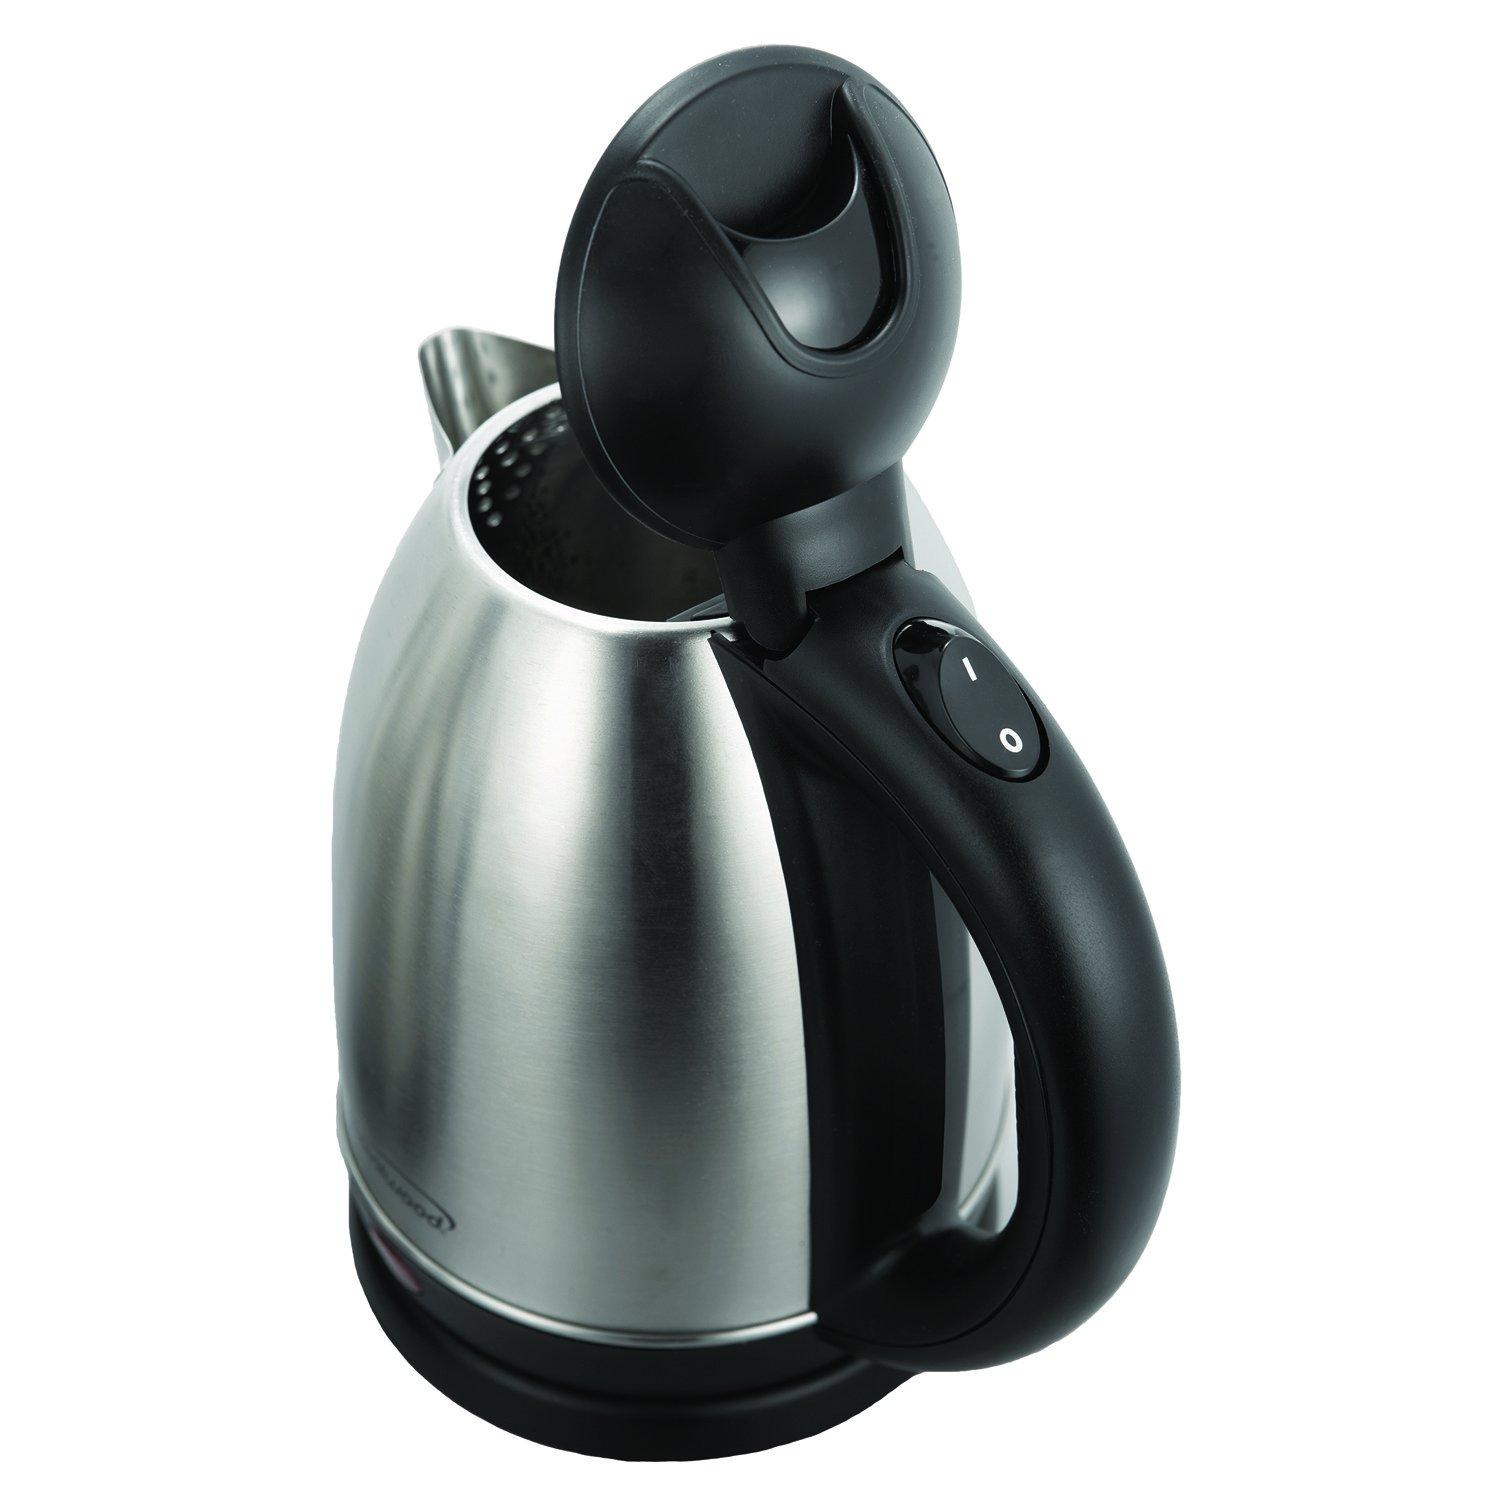 BRENTWOOD® KT-1780 1.5-LITER STAINLESS STEEL CORDLESS ELECTRIC KETTLE (Silver/Black)